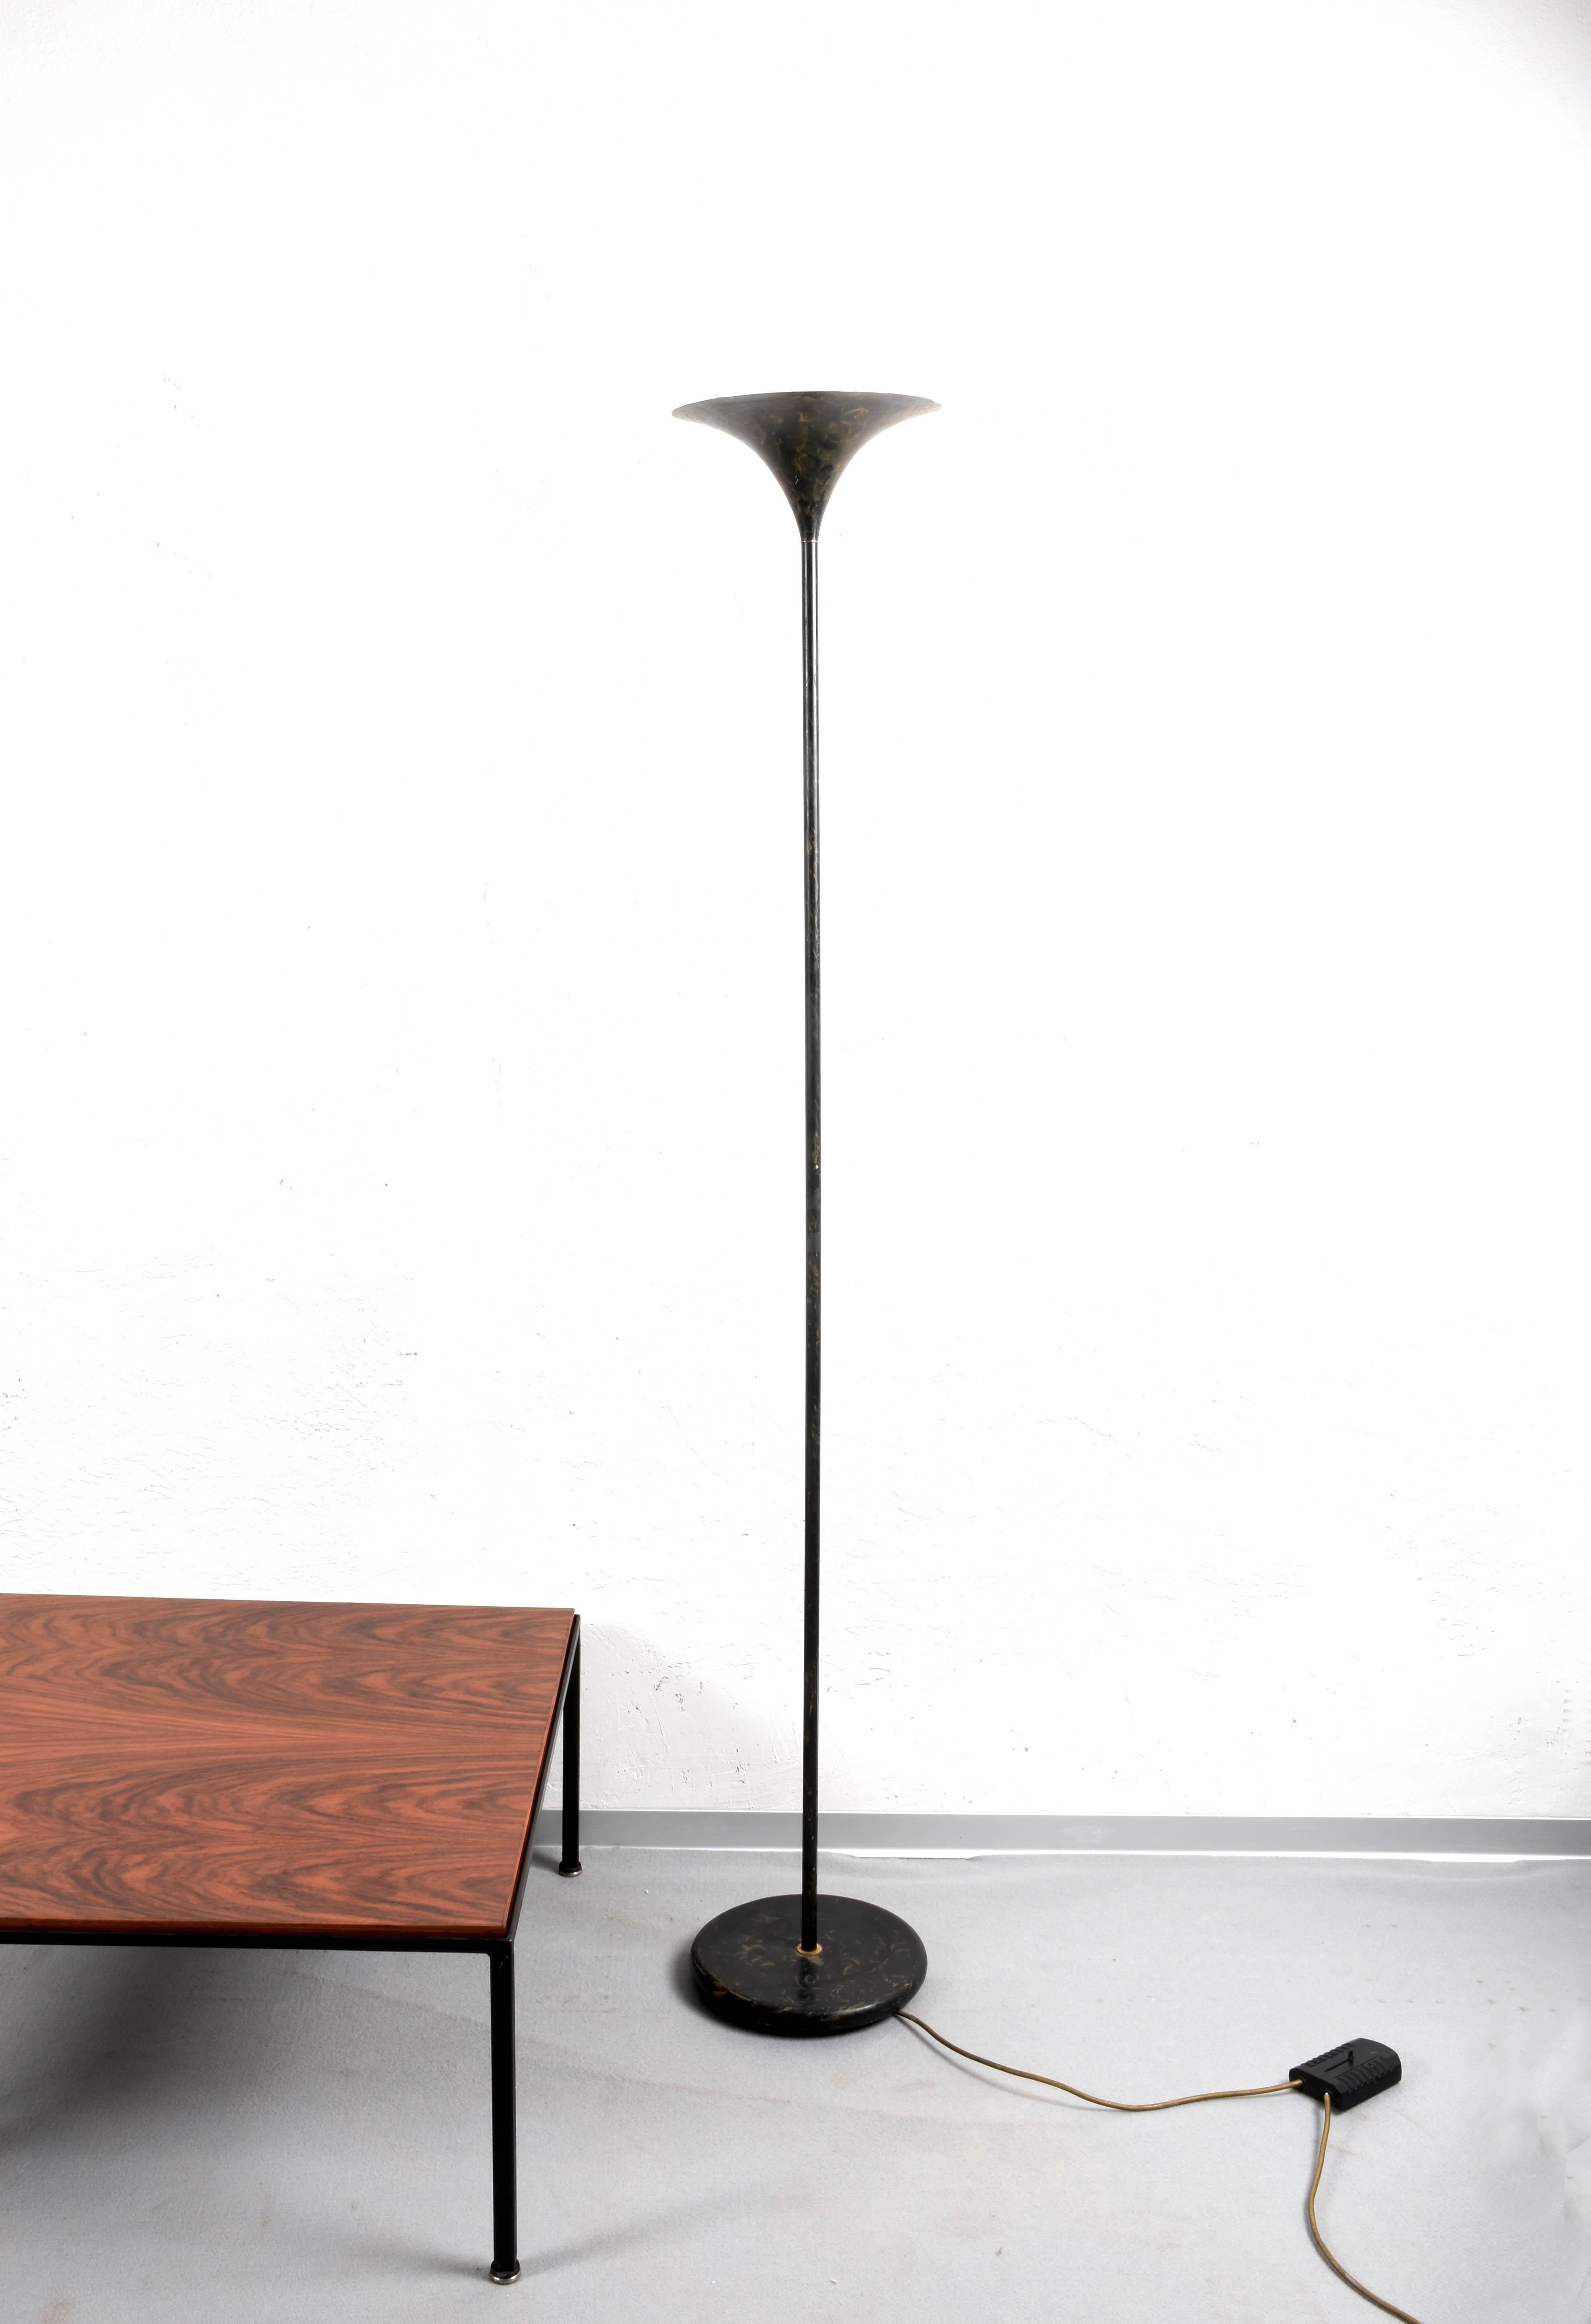 Amazing midcentury black aluminium tulip-shaped floor lamp with gold finishes. This fantastic piece was produced in Italy during the 1970s.

This wonderful item was produced by mixing aluminium and gold with a typical midcentury pattern, with a